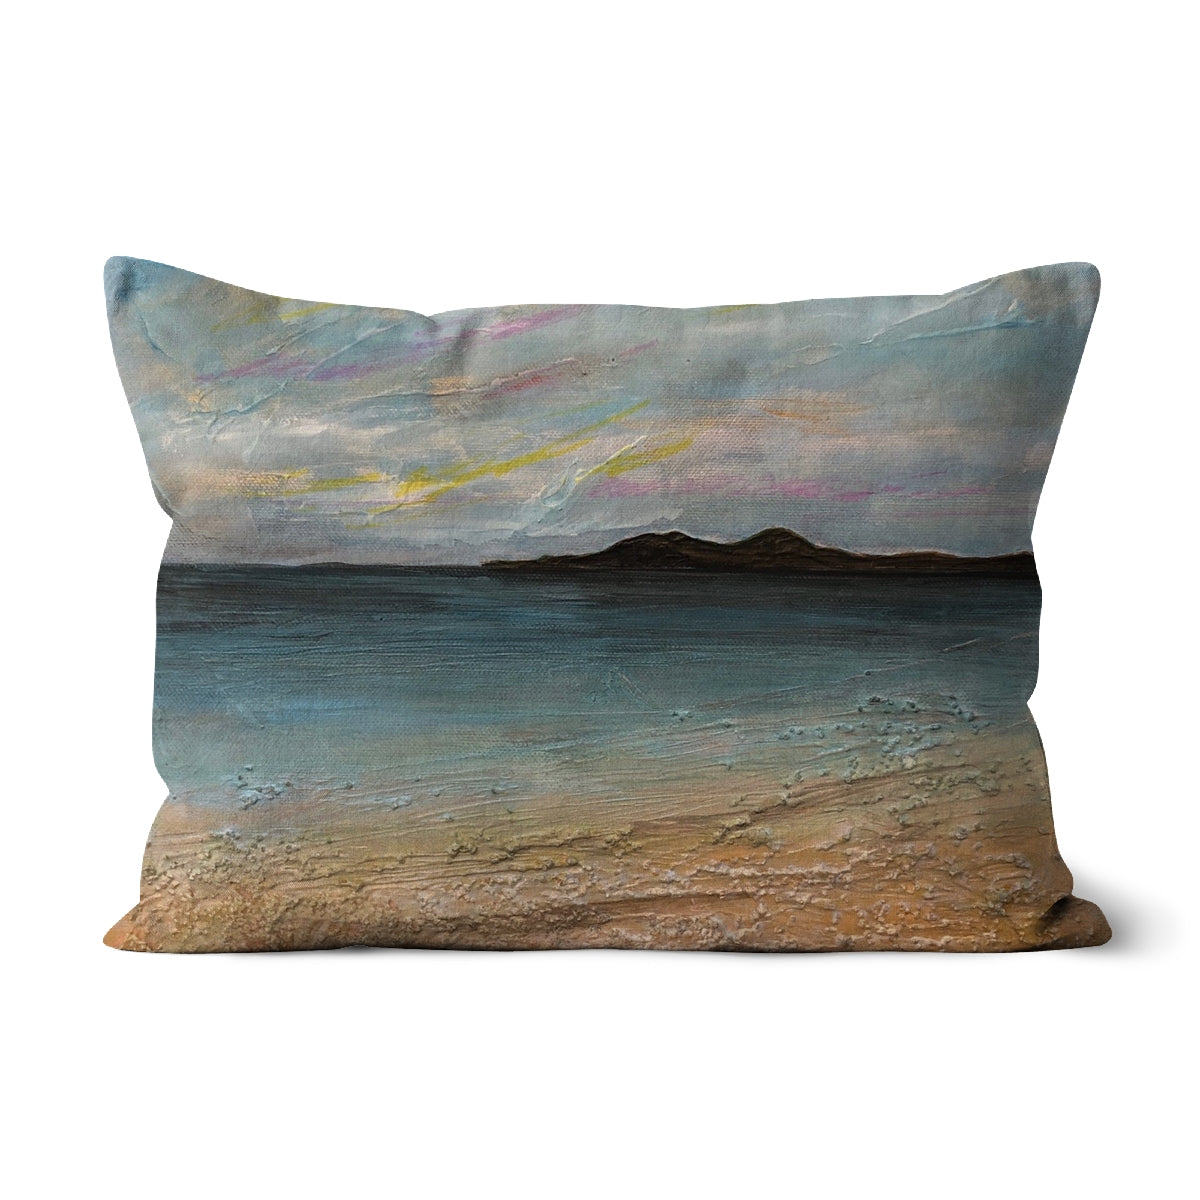 Garrynamonie Beach South Uist Art Gifts Cushion-Cushions-Hebridean Islands Art Gallery-Faux Suede-19"x13"-Paintings, Prints, Homeware, Art Gifts From Scotland By Scottish Artist Kevin Hunter